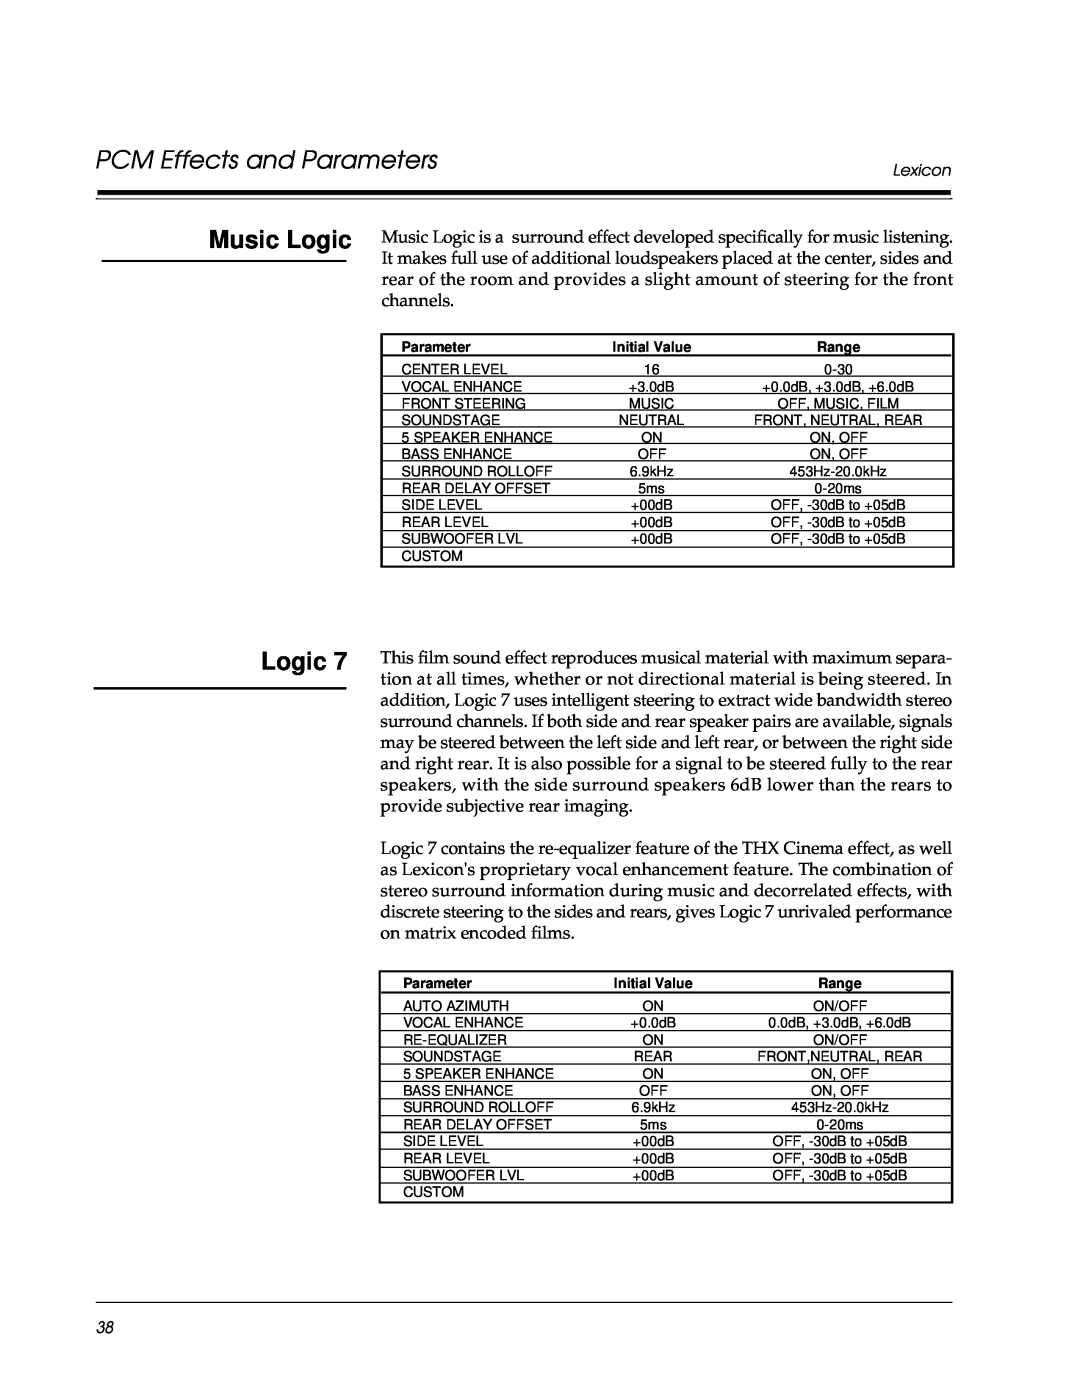 Lexicon Lexicon Part #070-13234 owner manual Logic, PCM Effects and Parameters 